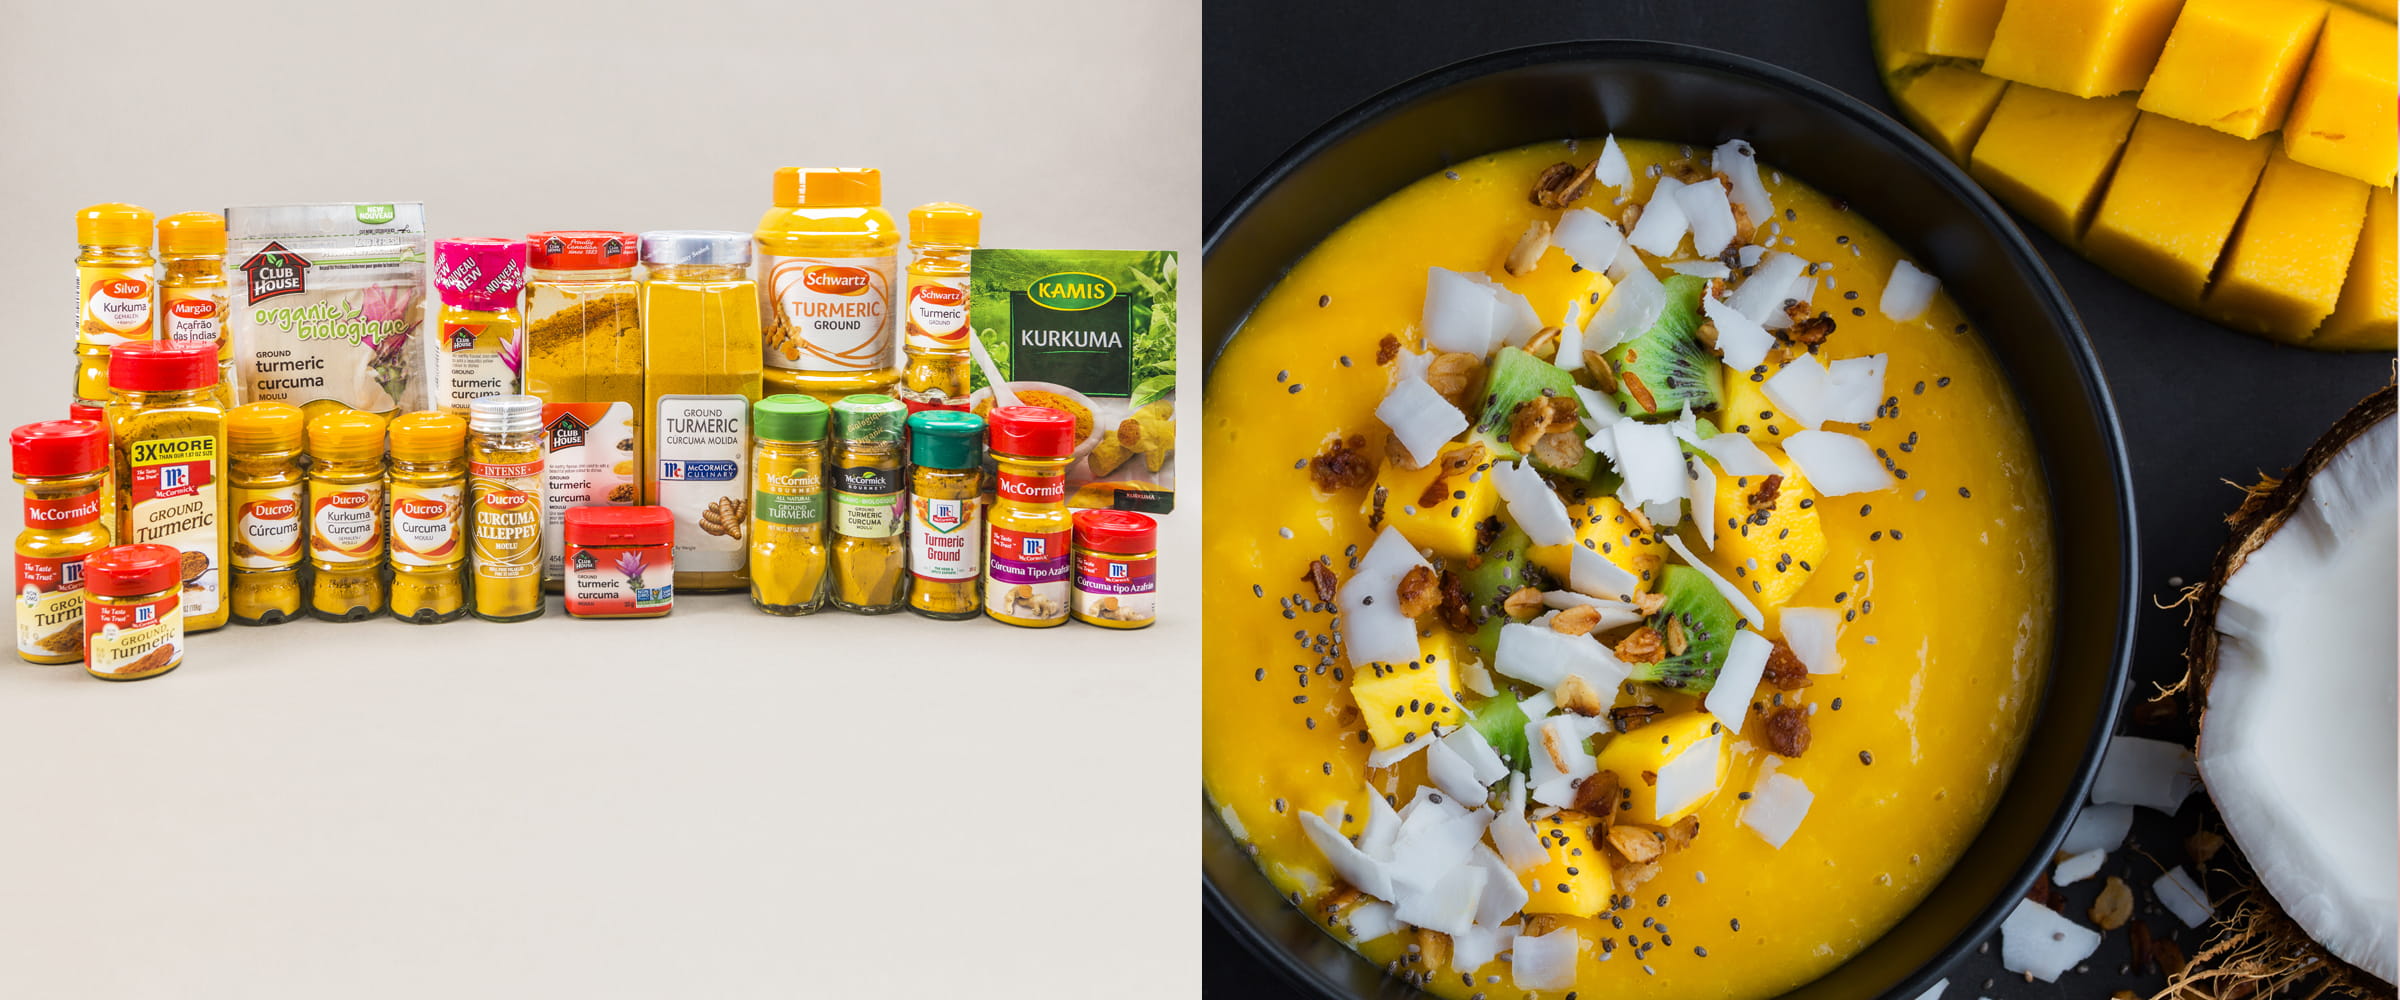 turmeric-smoothie-bowl-and-turmeric-products